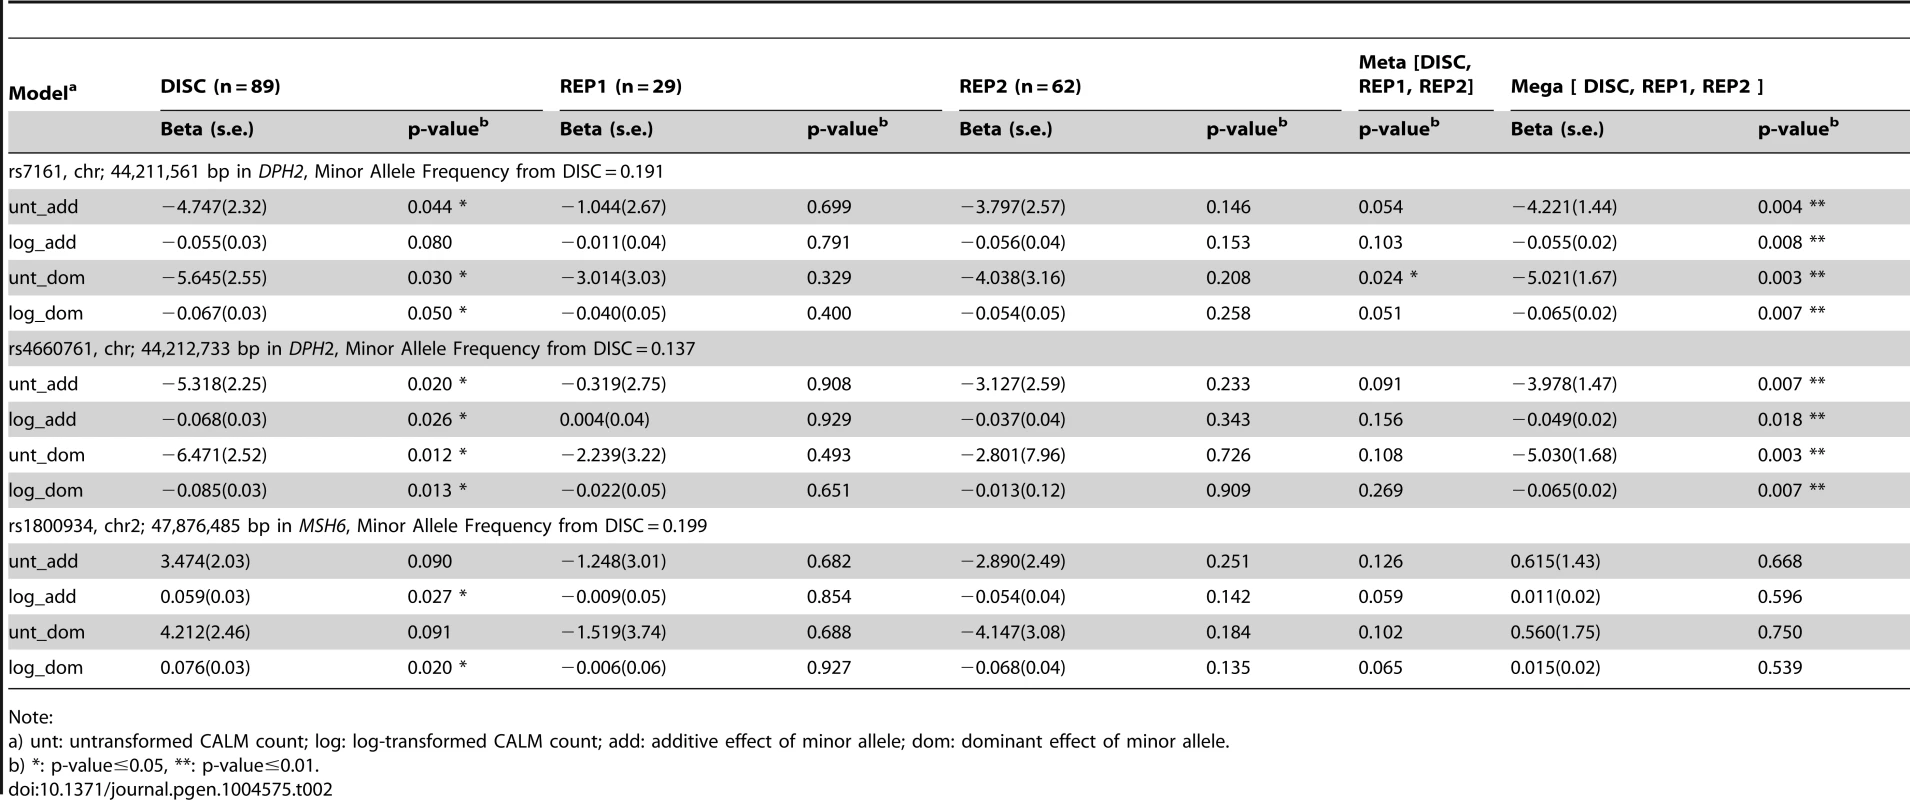 Significance of association of SNVs with CALM count by simple linear regression adjusting for age and sex using self-reported European-American samples.